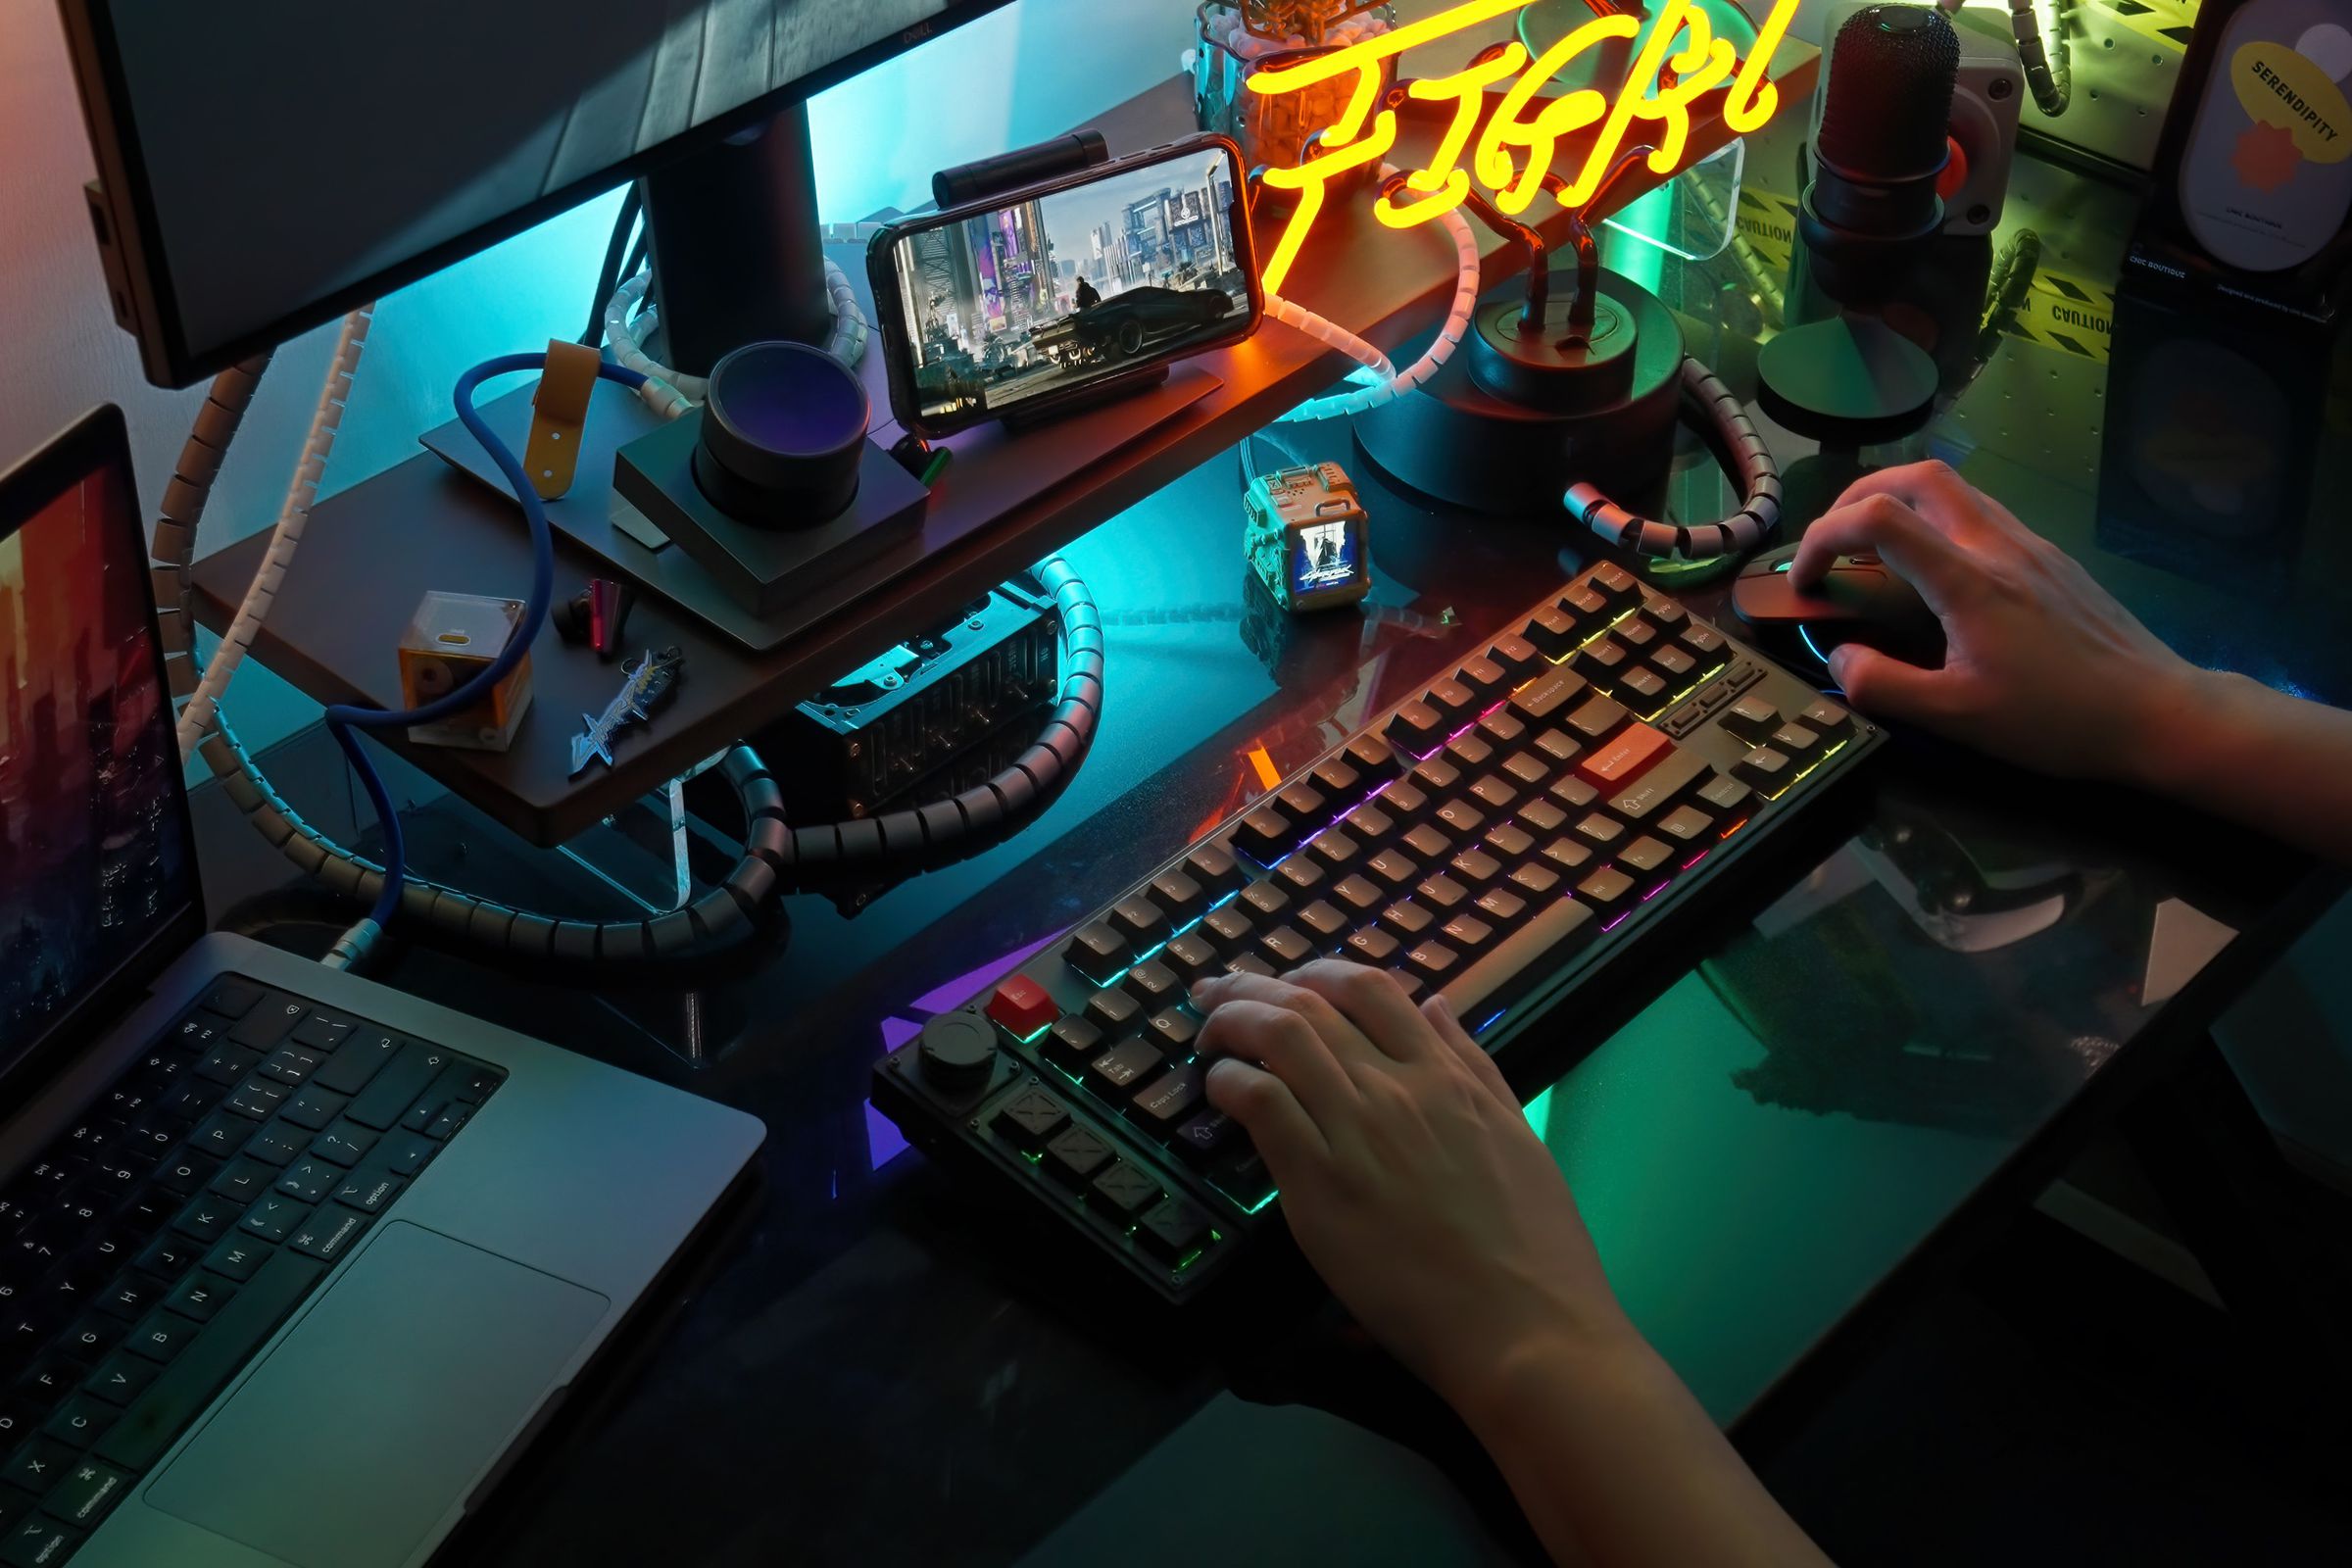 A person using a keyboard and mouse to play a game.